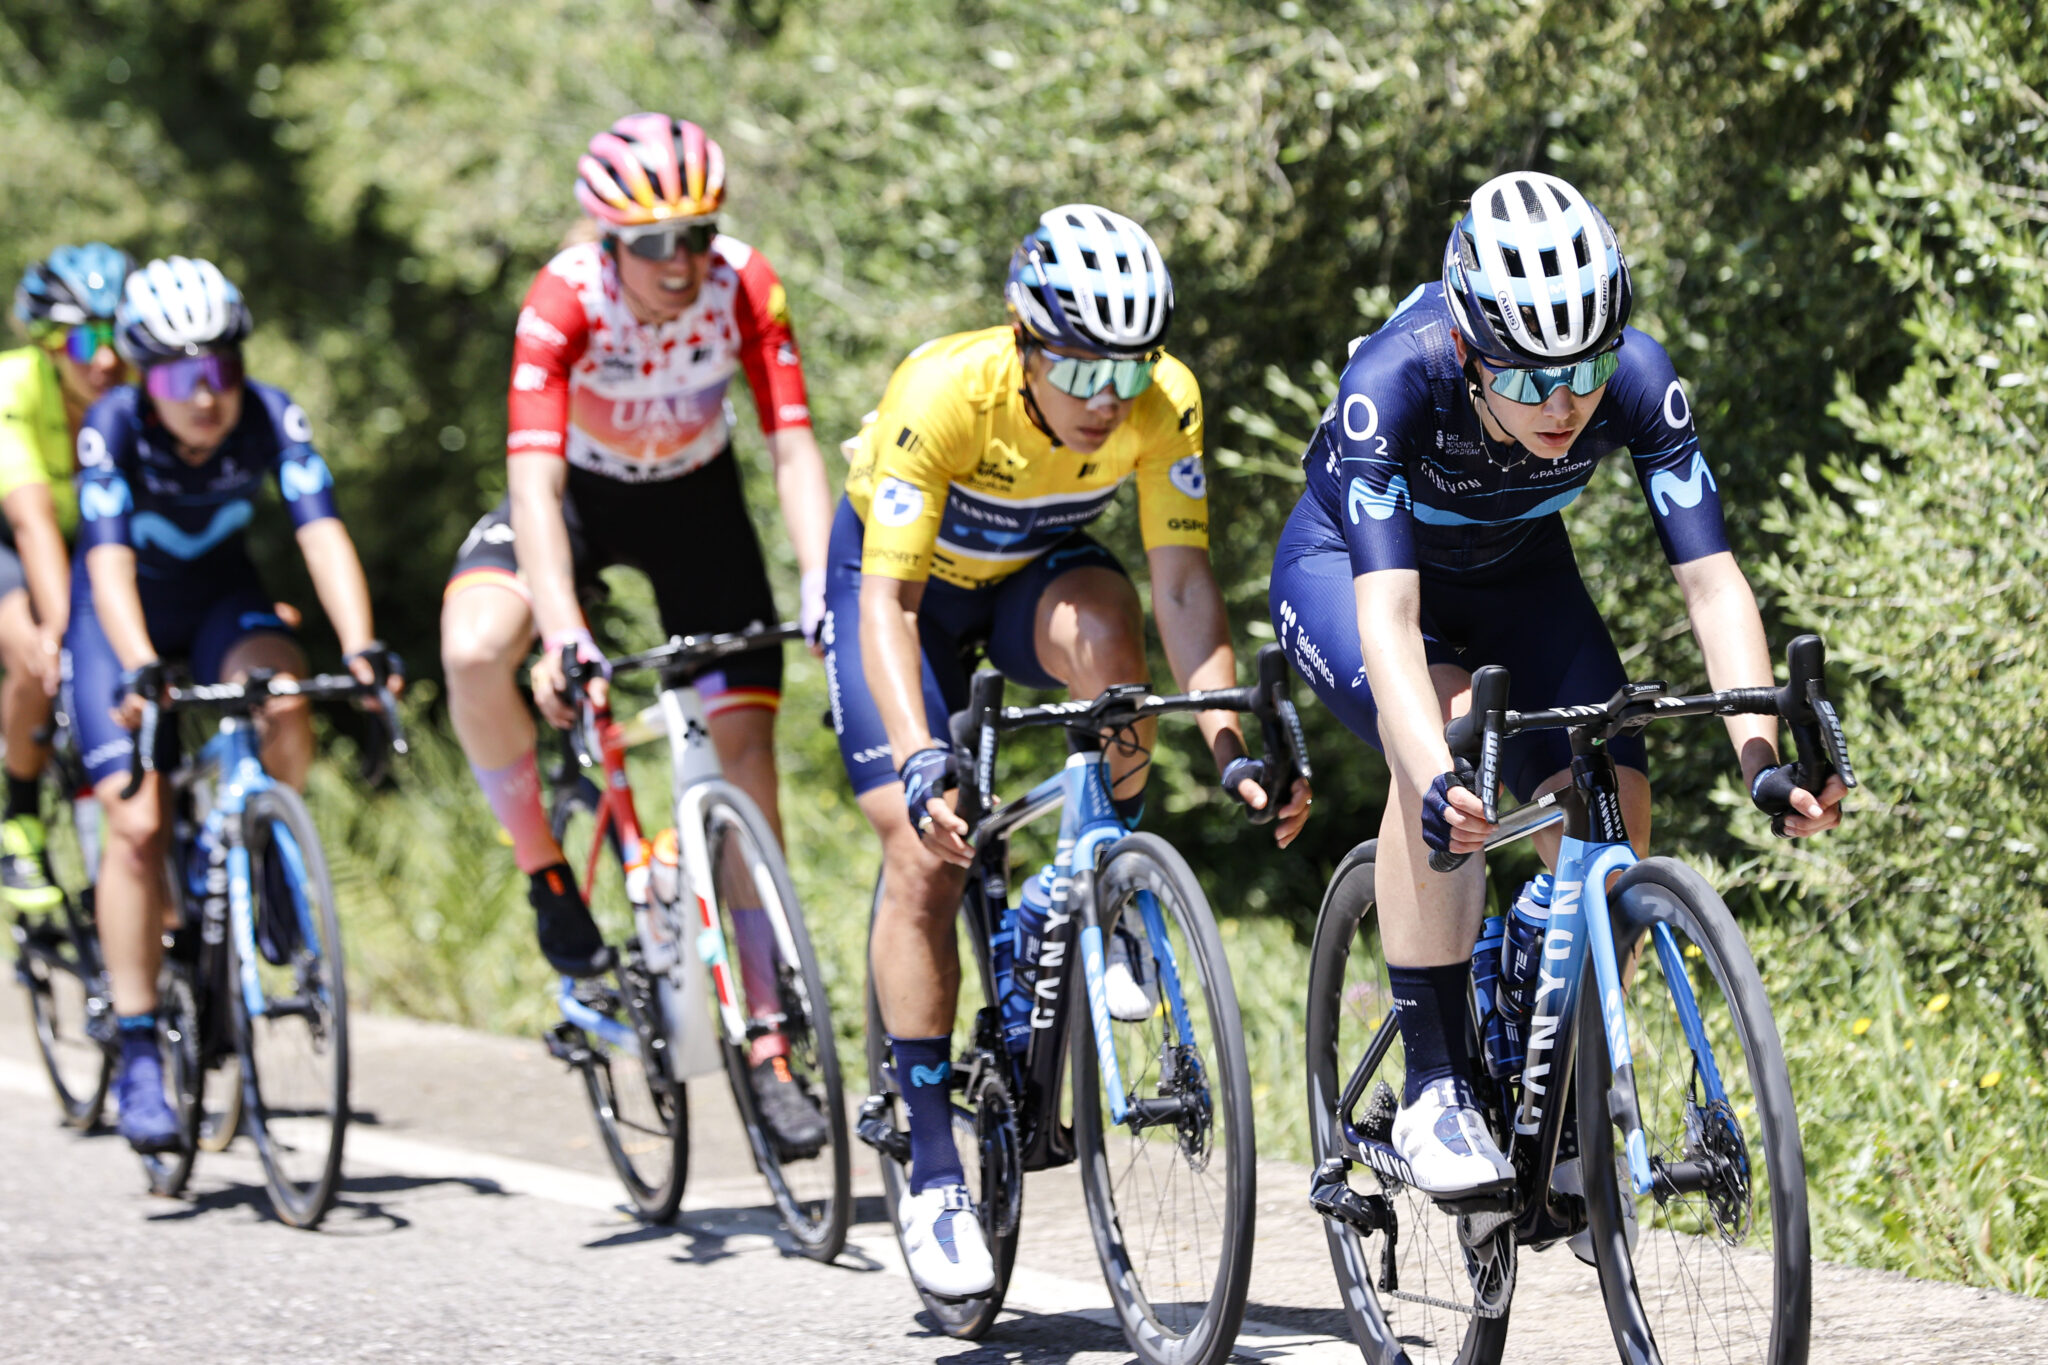 Movistar Team takes it all in Andalusia!